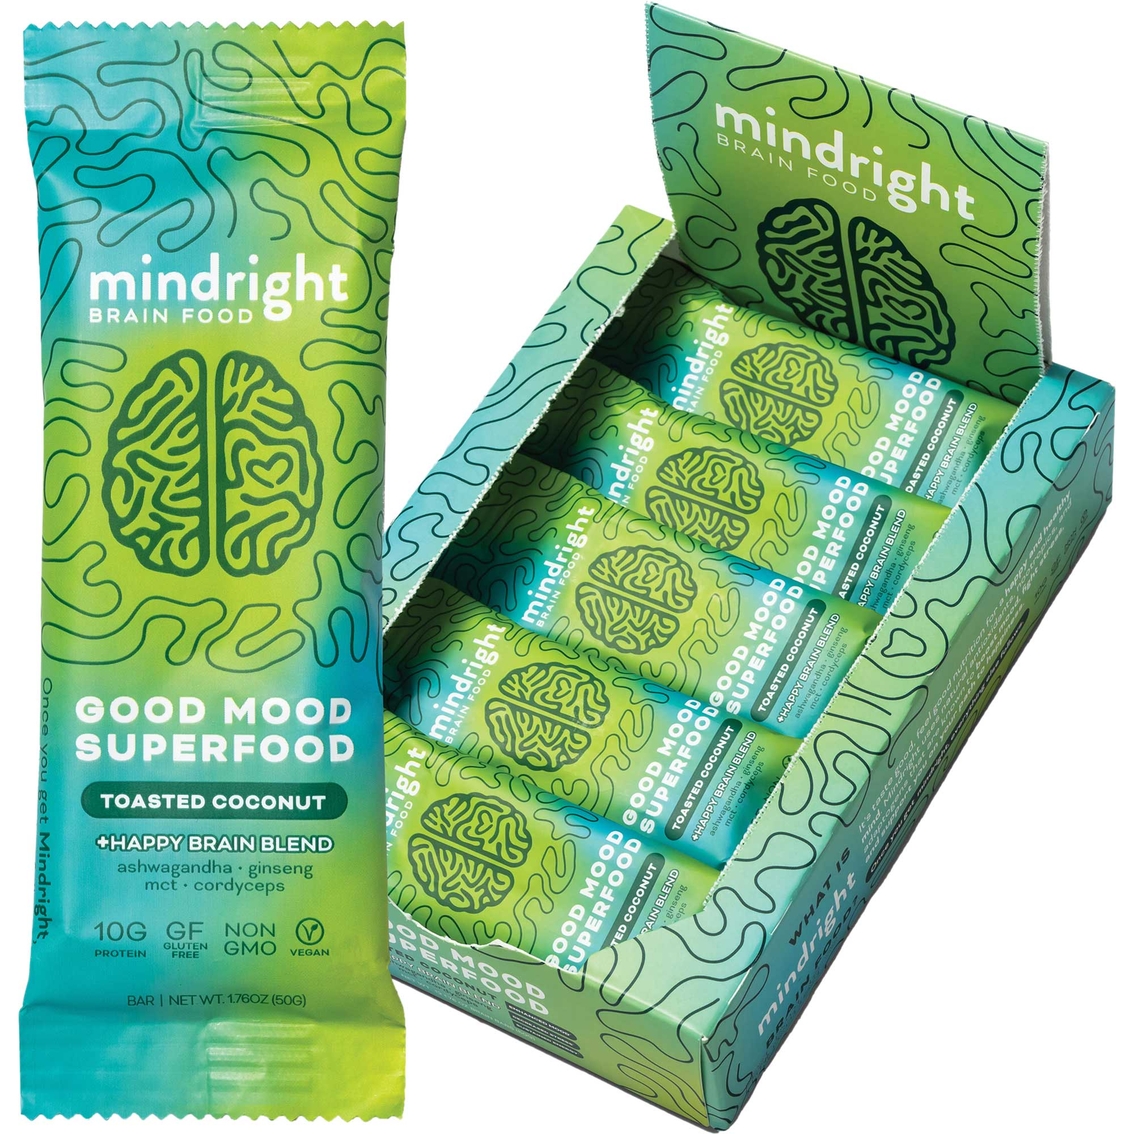 Mindright Nootropic Infused Protein Bars Toasted Coconut 24 pk., 1.79 oz. each